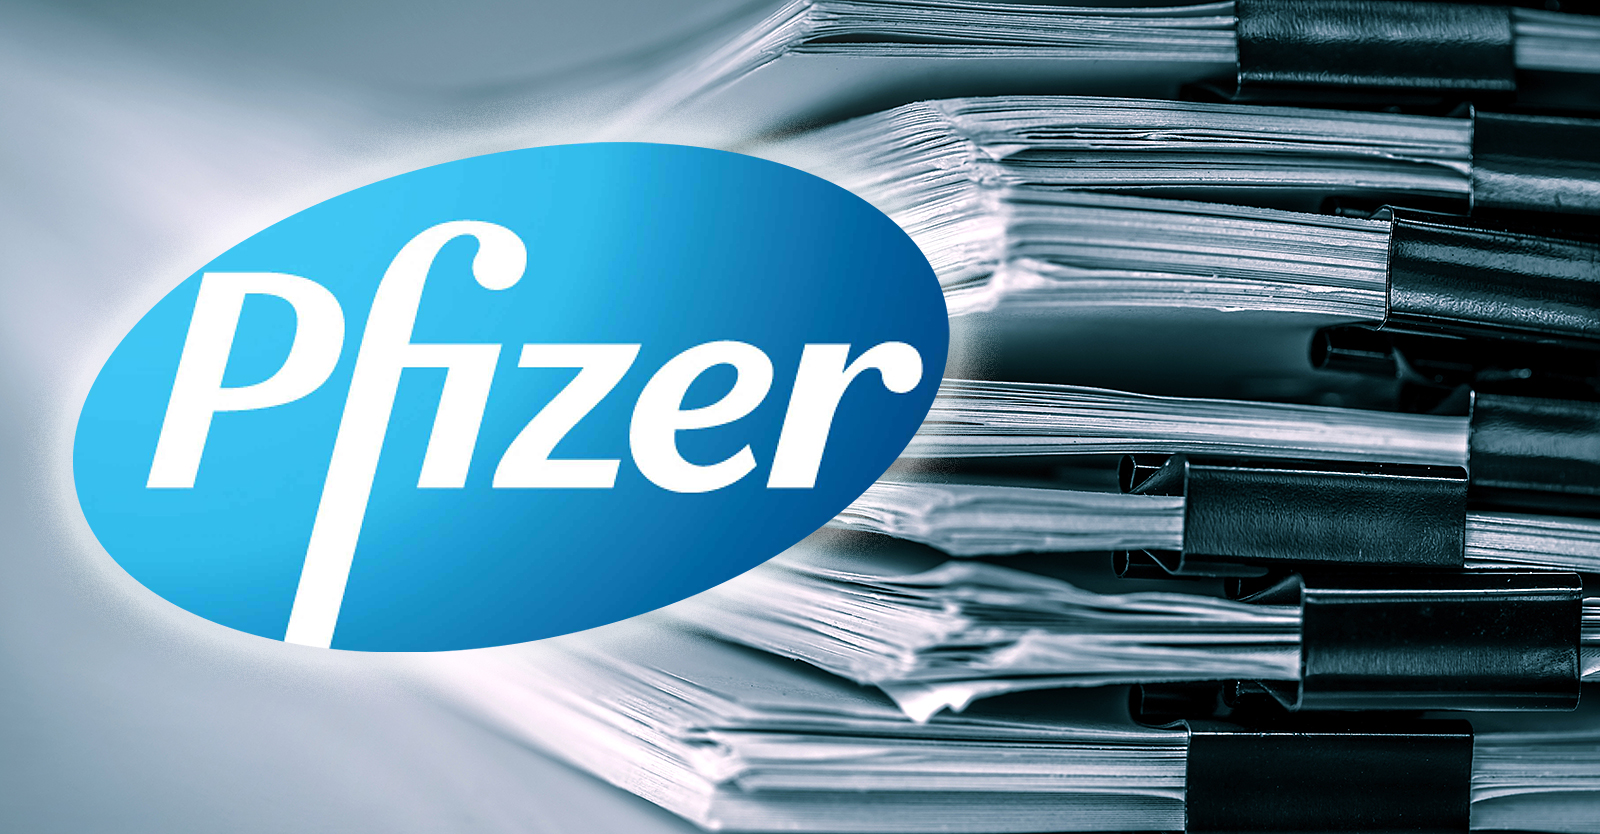 Pfizer Hired 600+ People to Process Vaccine Injury Reports, Documents Reveal